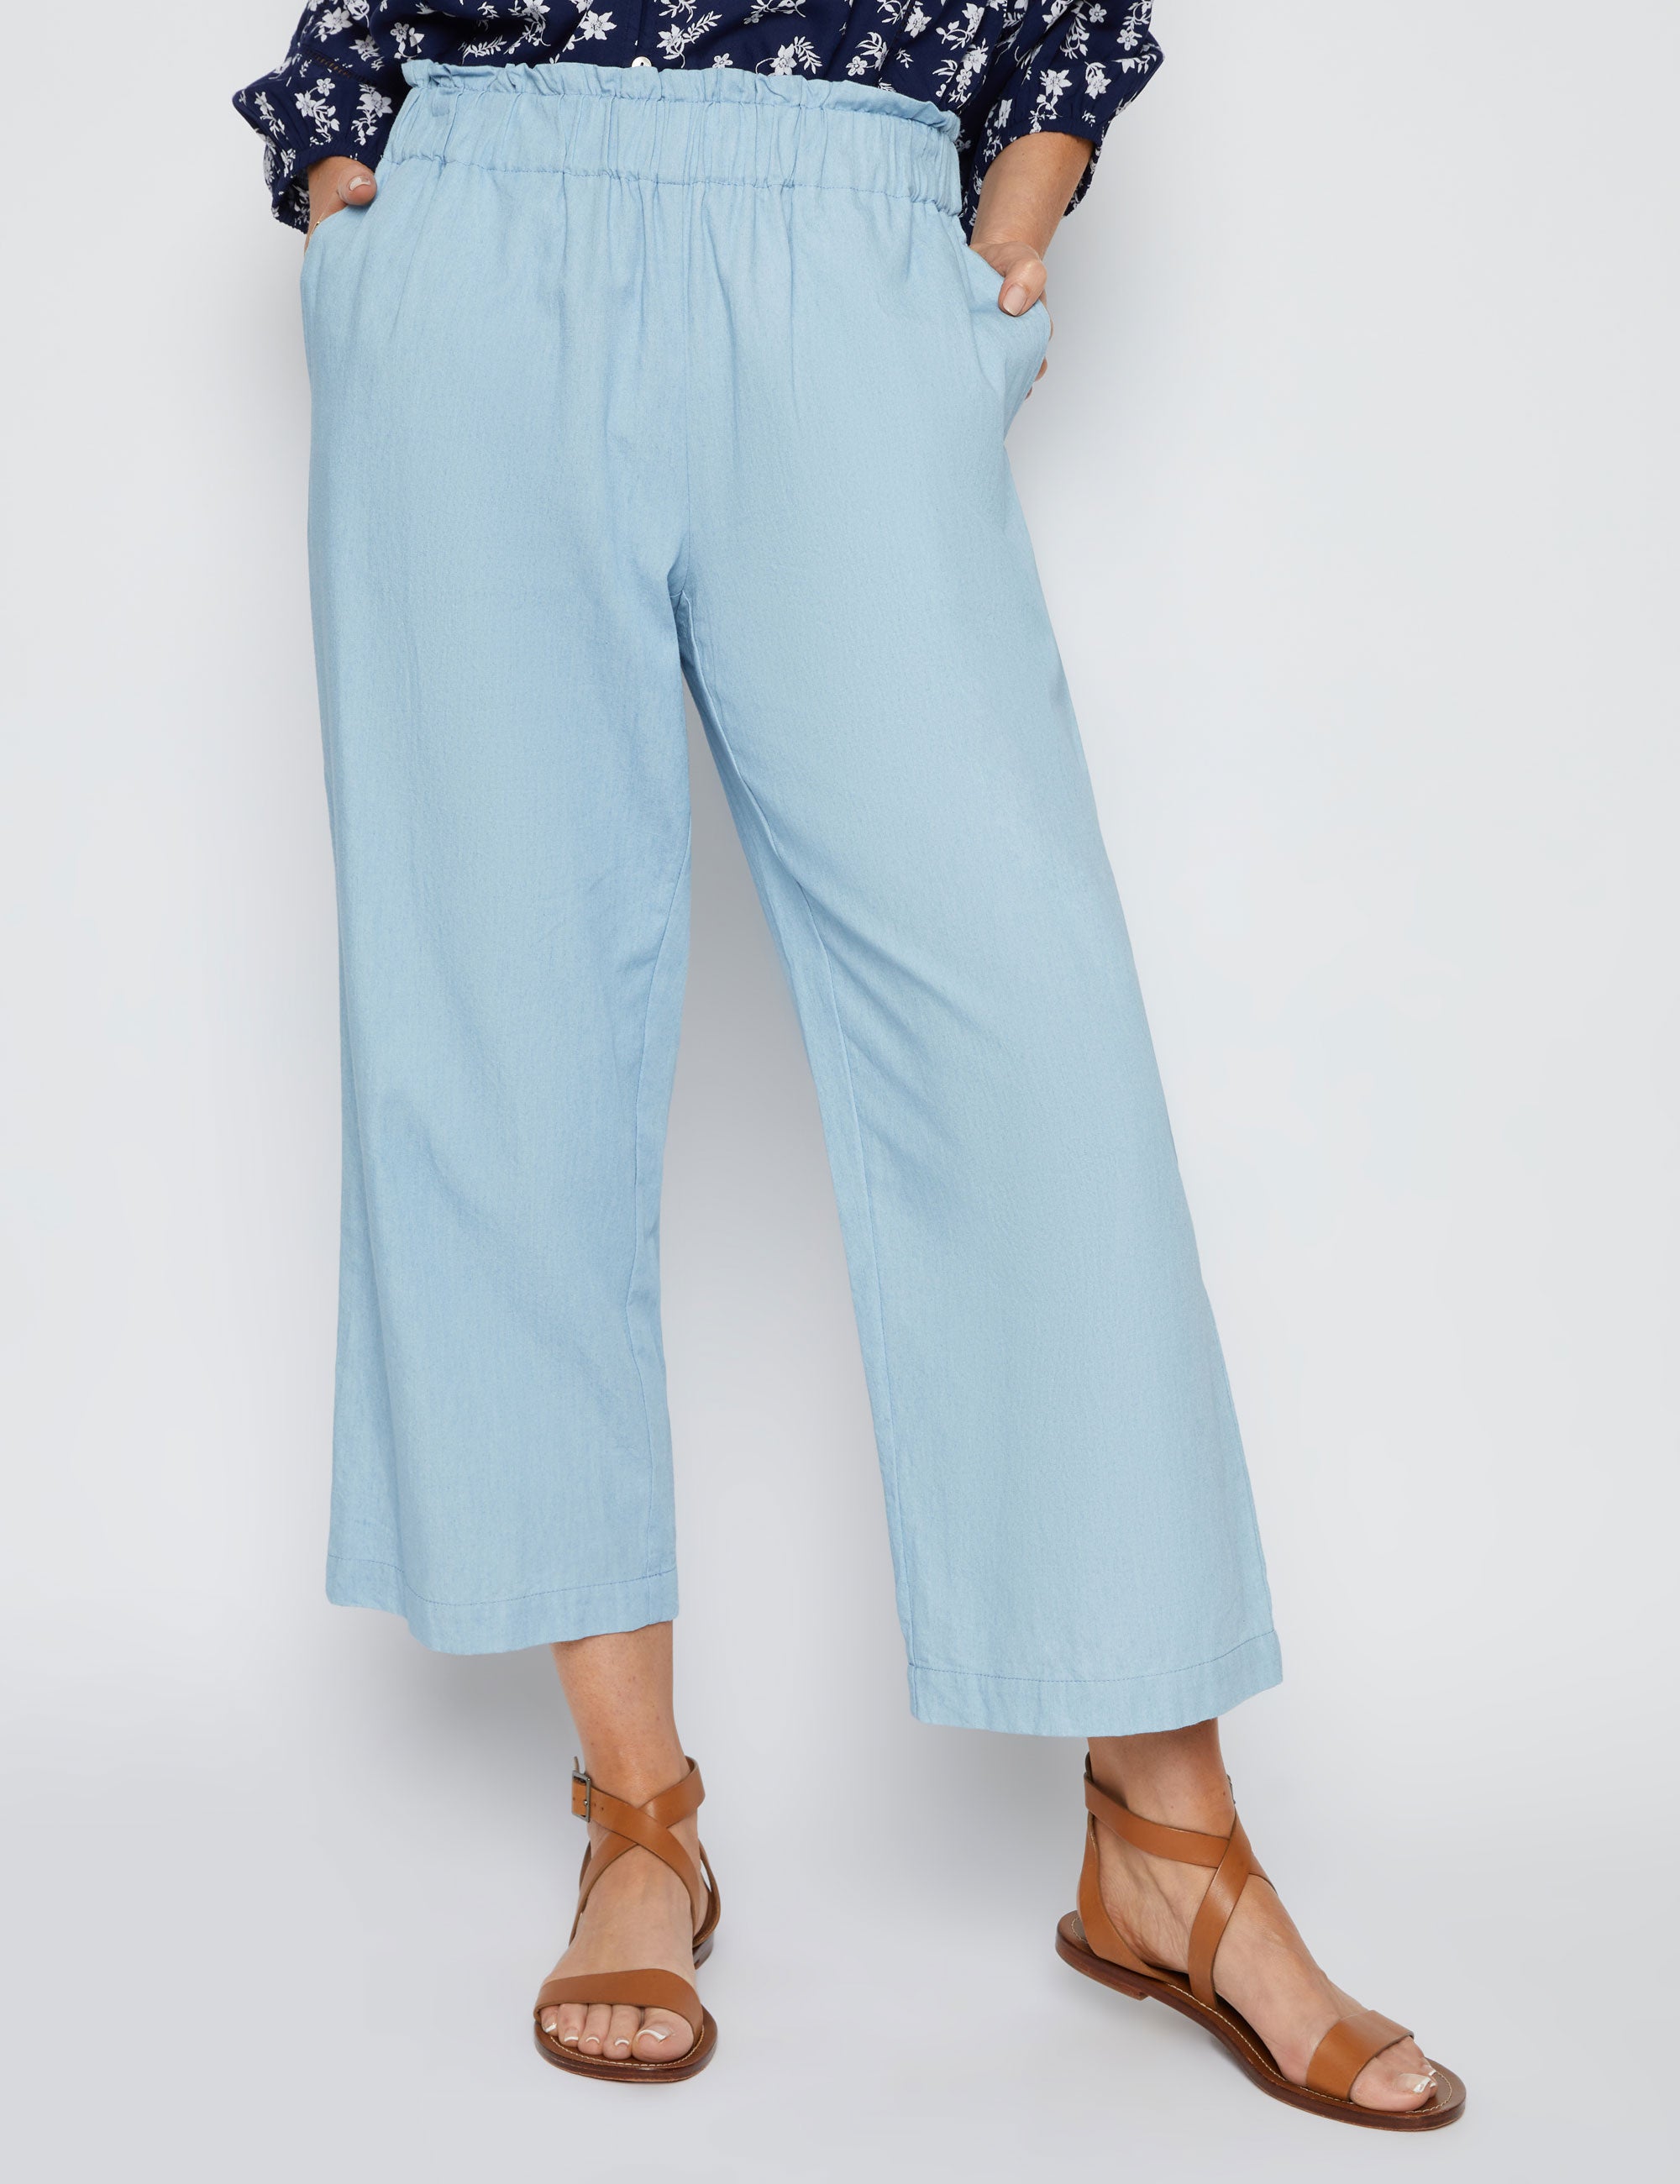 Millers Ankle Length Paperbag Waist Chambray Pull on Pant | Crossroads